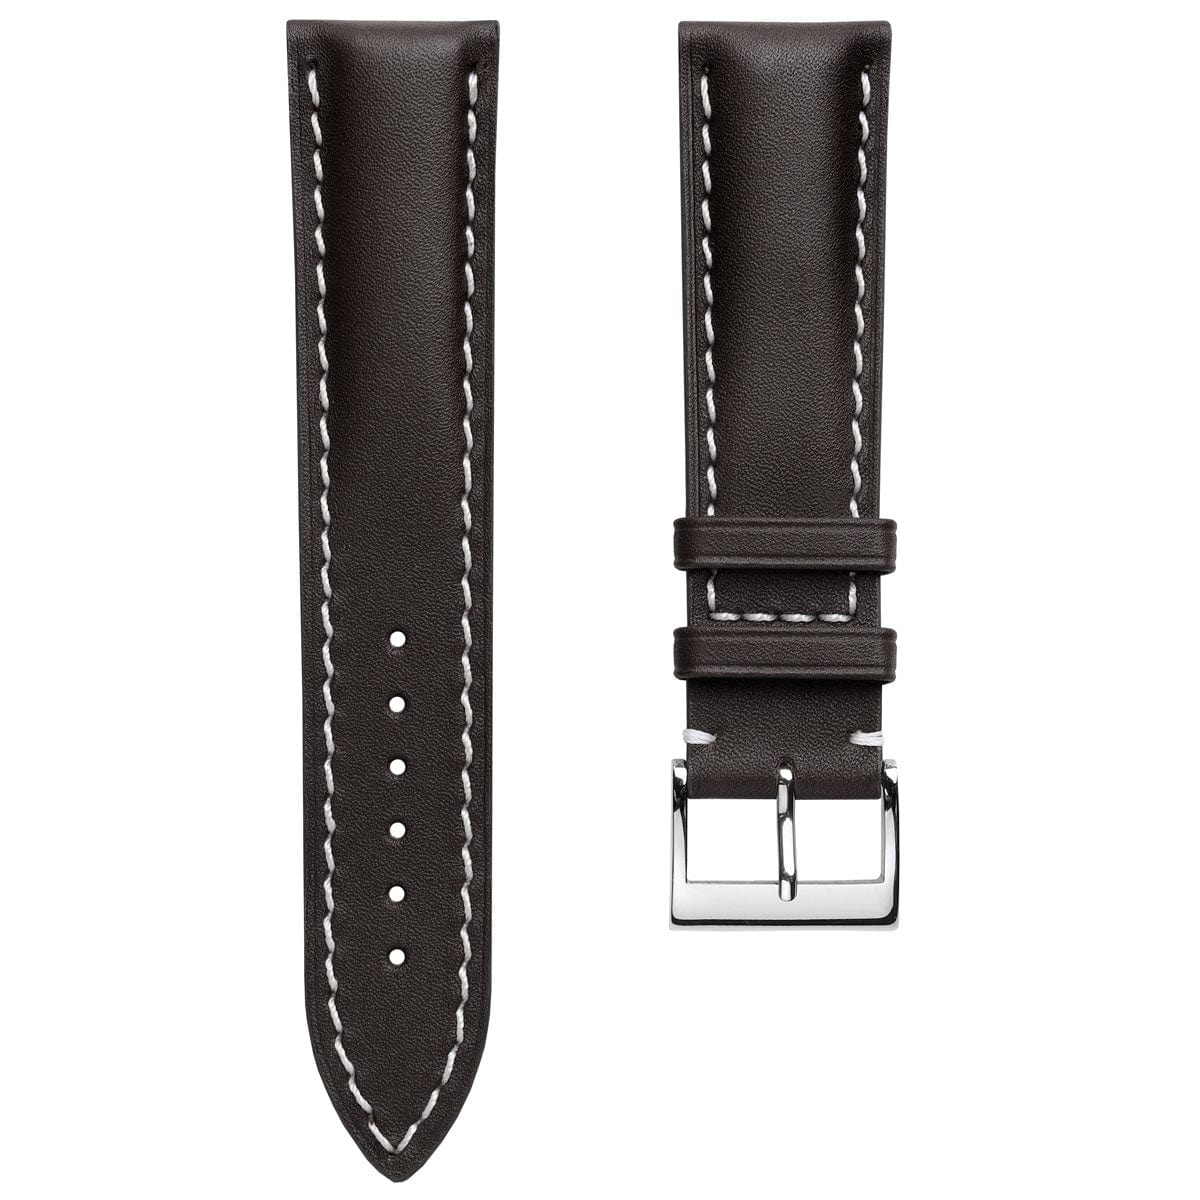 Ostend Baranil Thick Padded Leather Watch Strap - Chocolate Brown